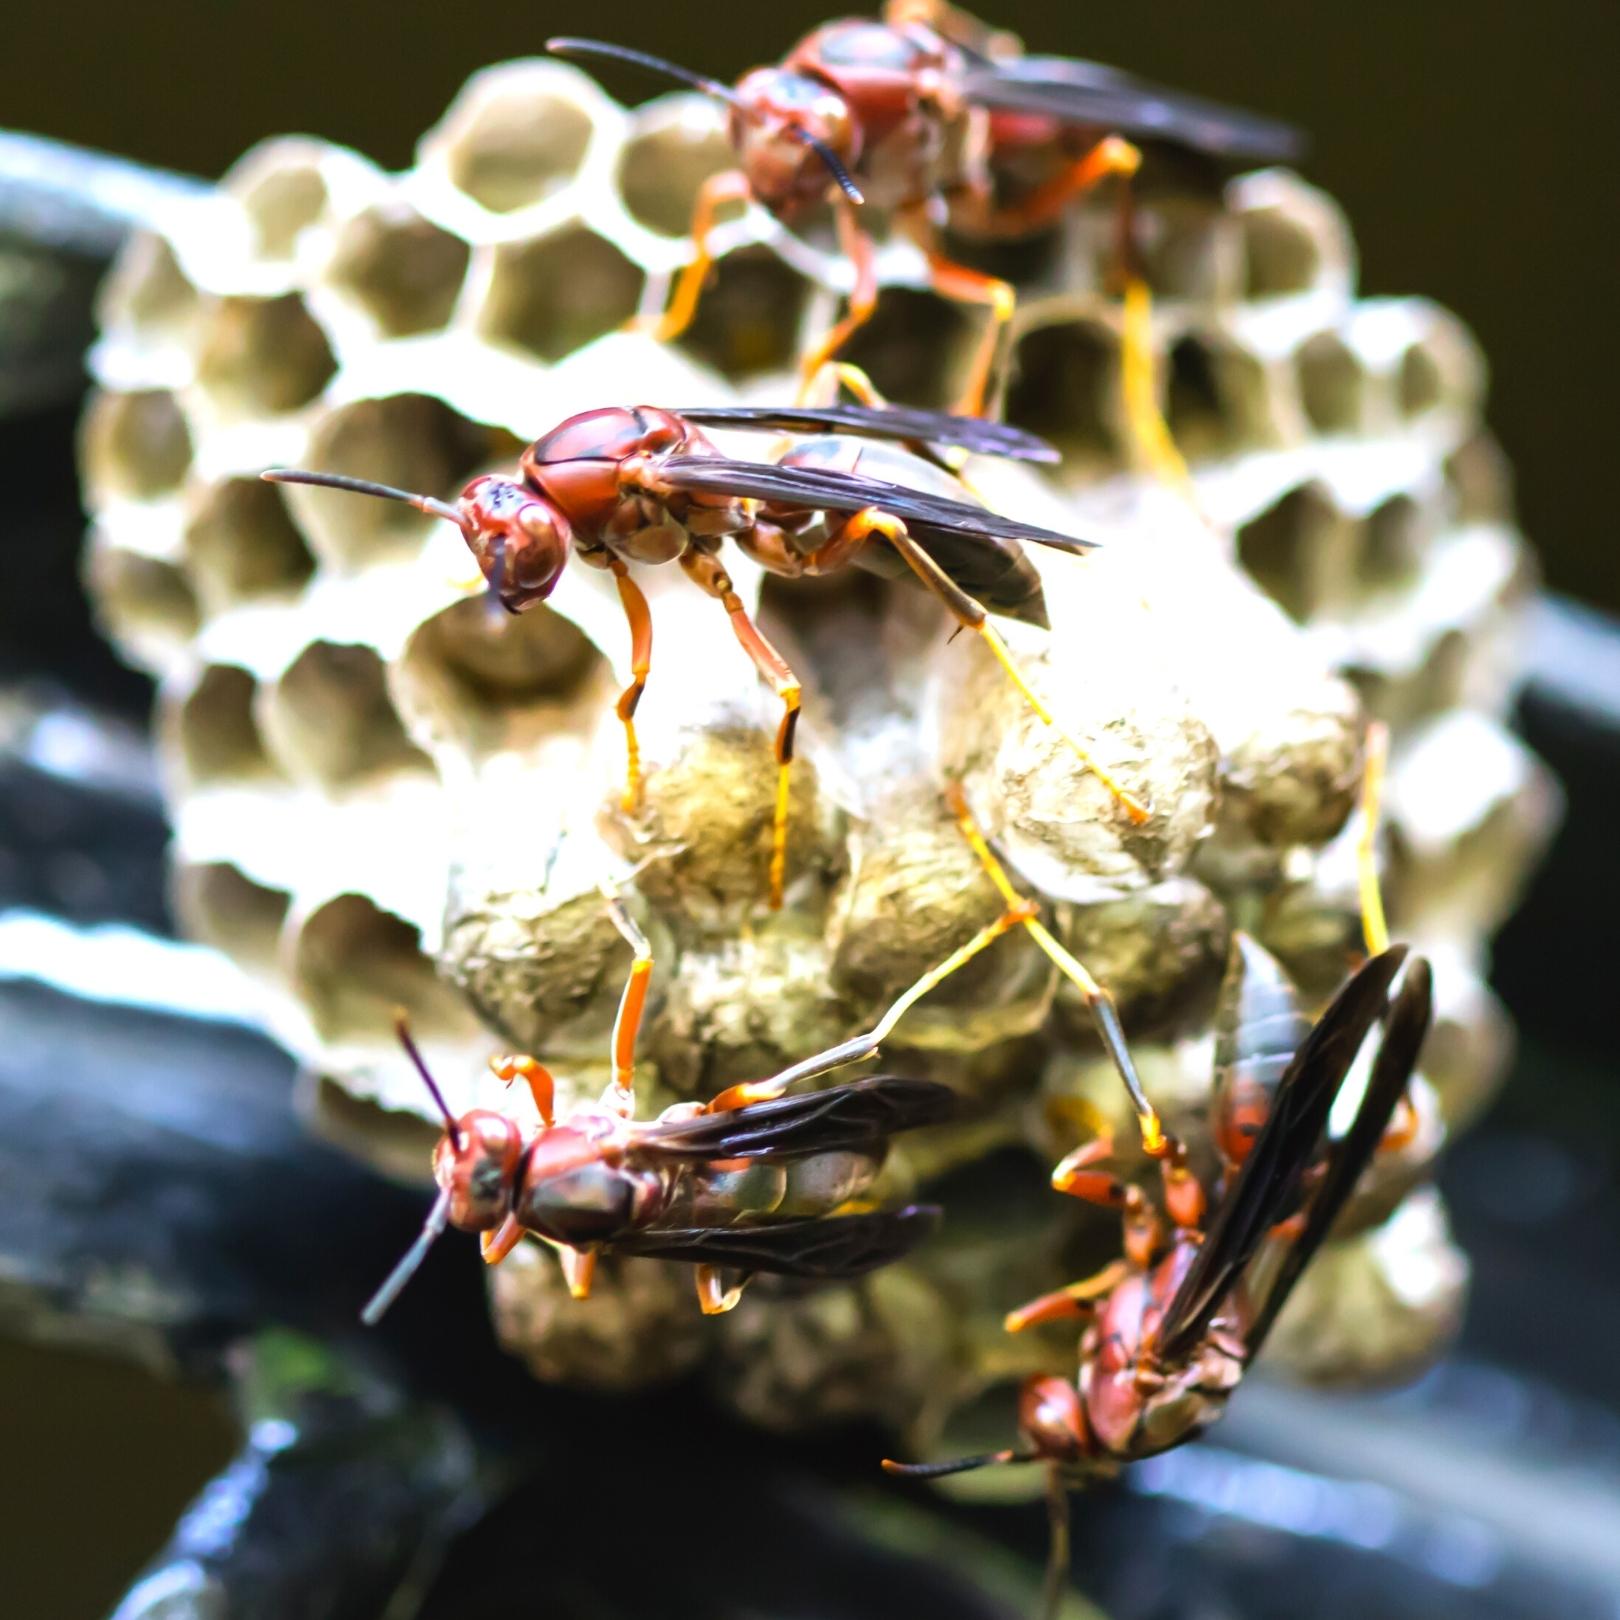 Paper wasps tending to their nest